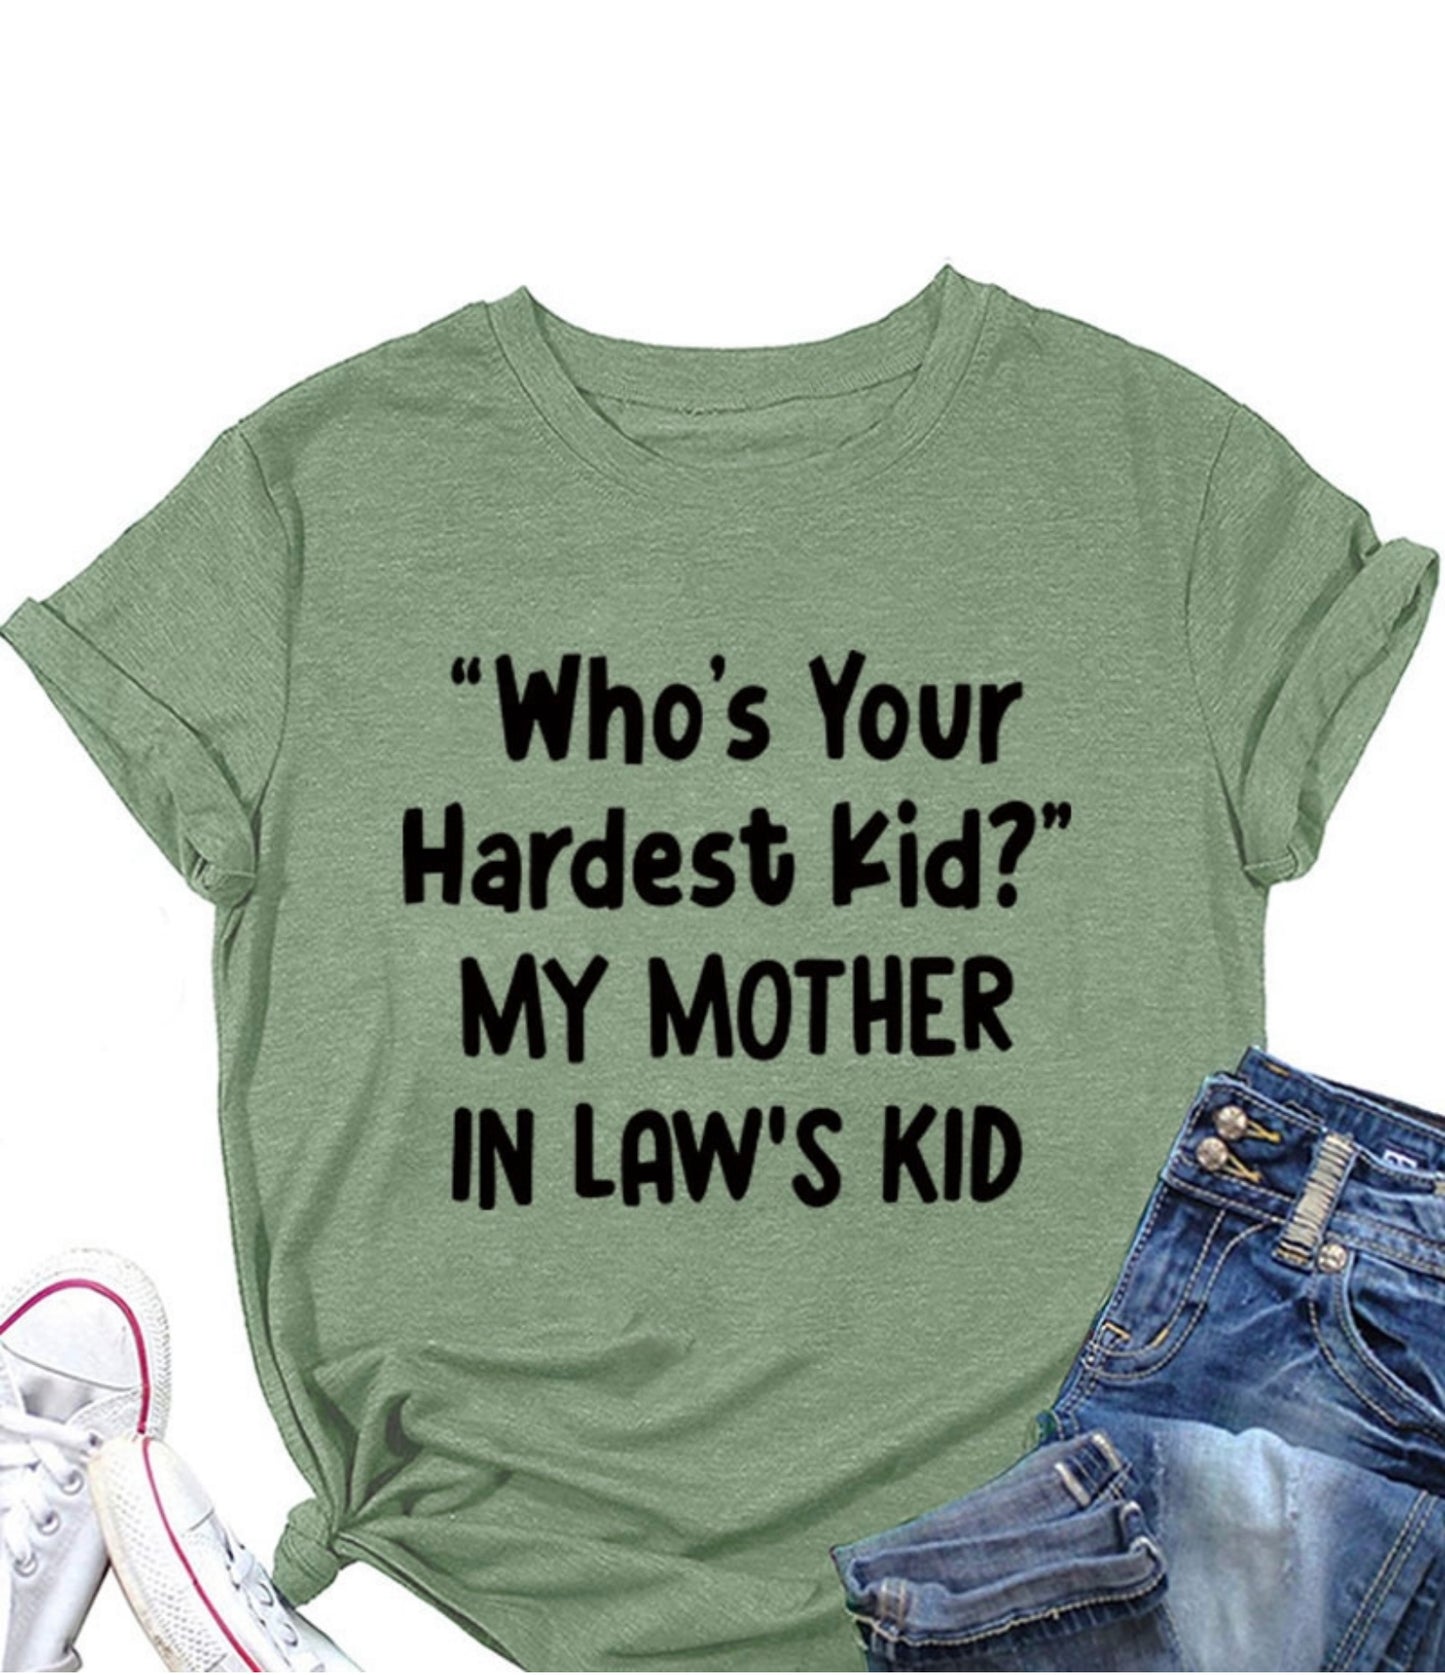 Who's Your Hardest Kid? My Mother In Law's kid. T-shirt